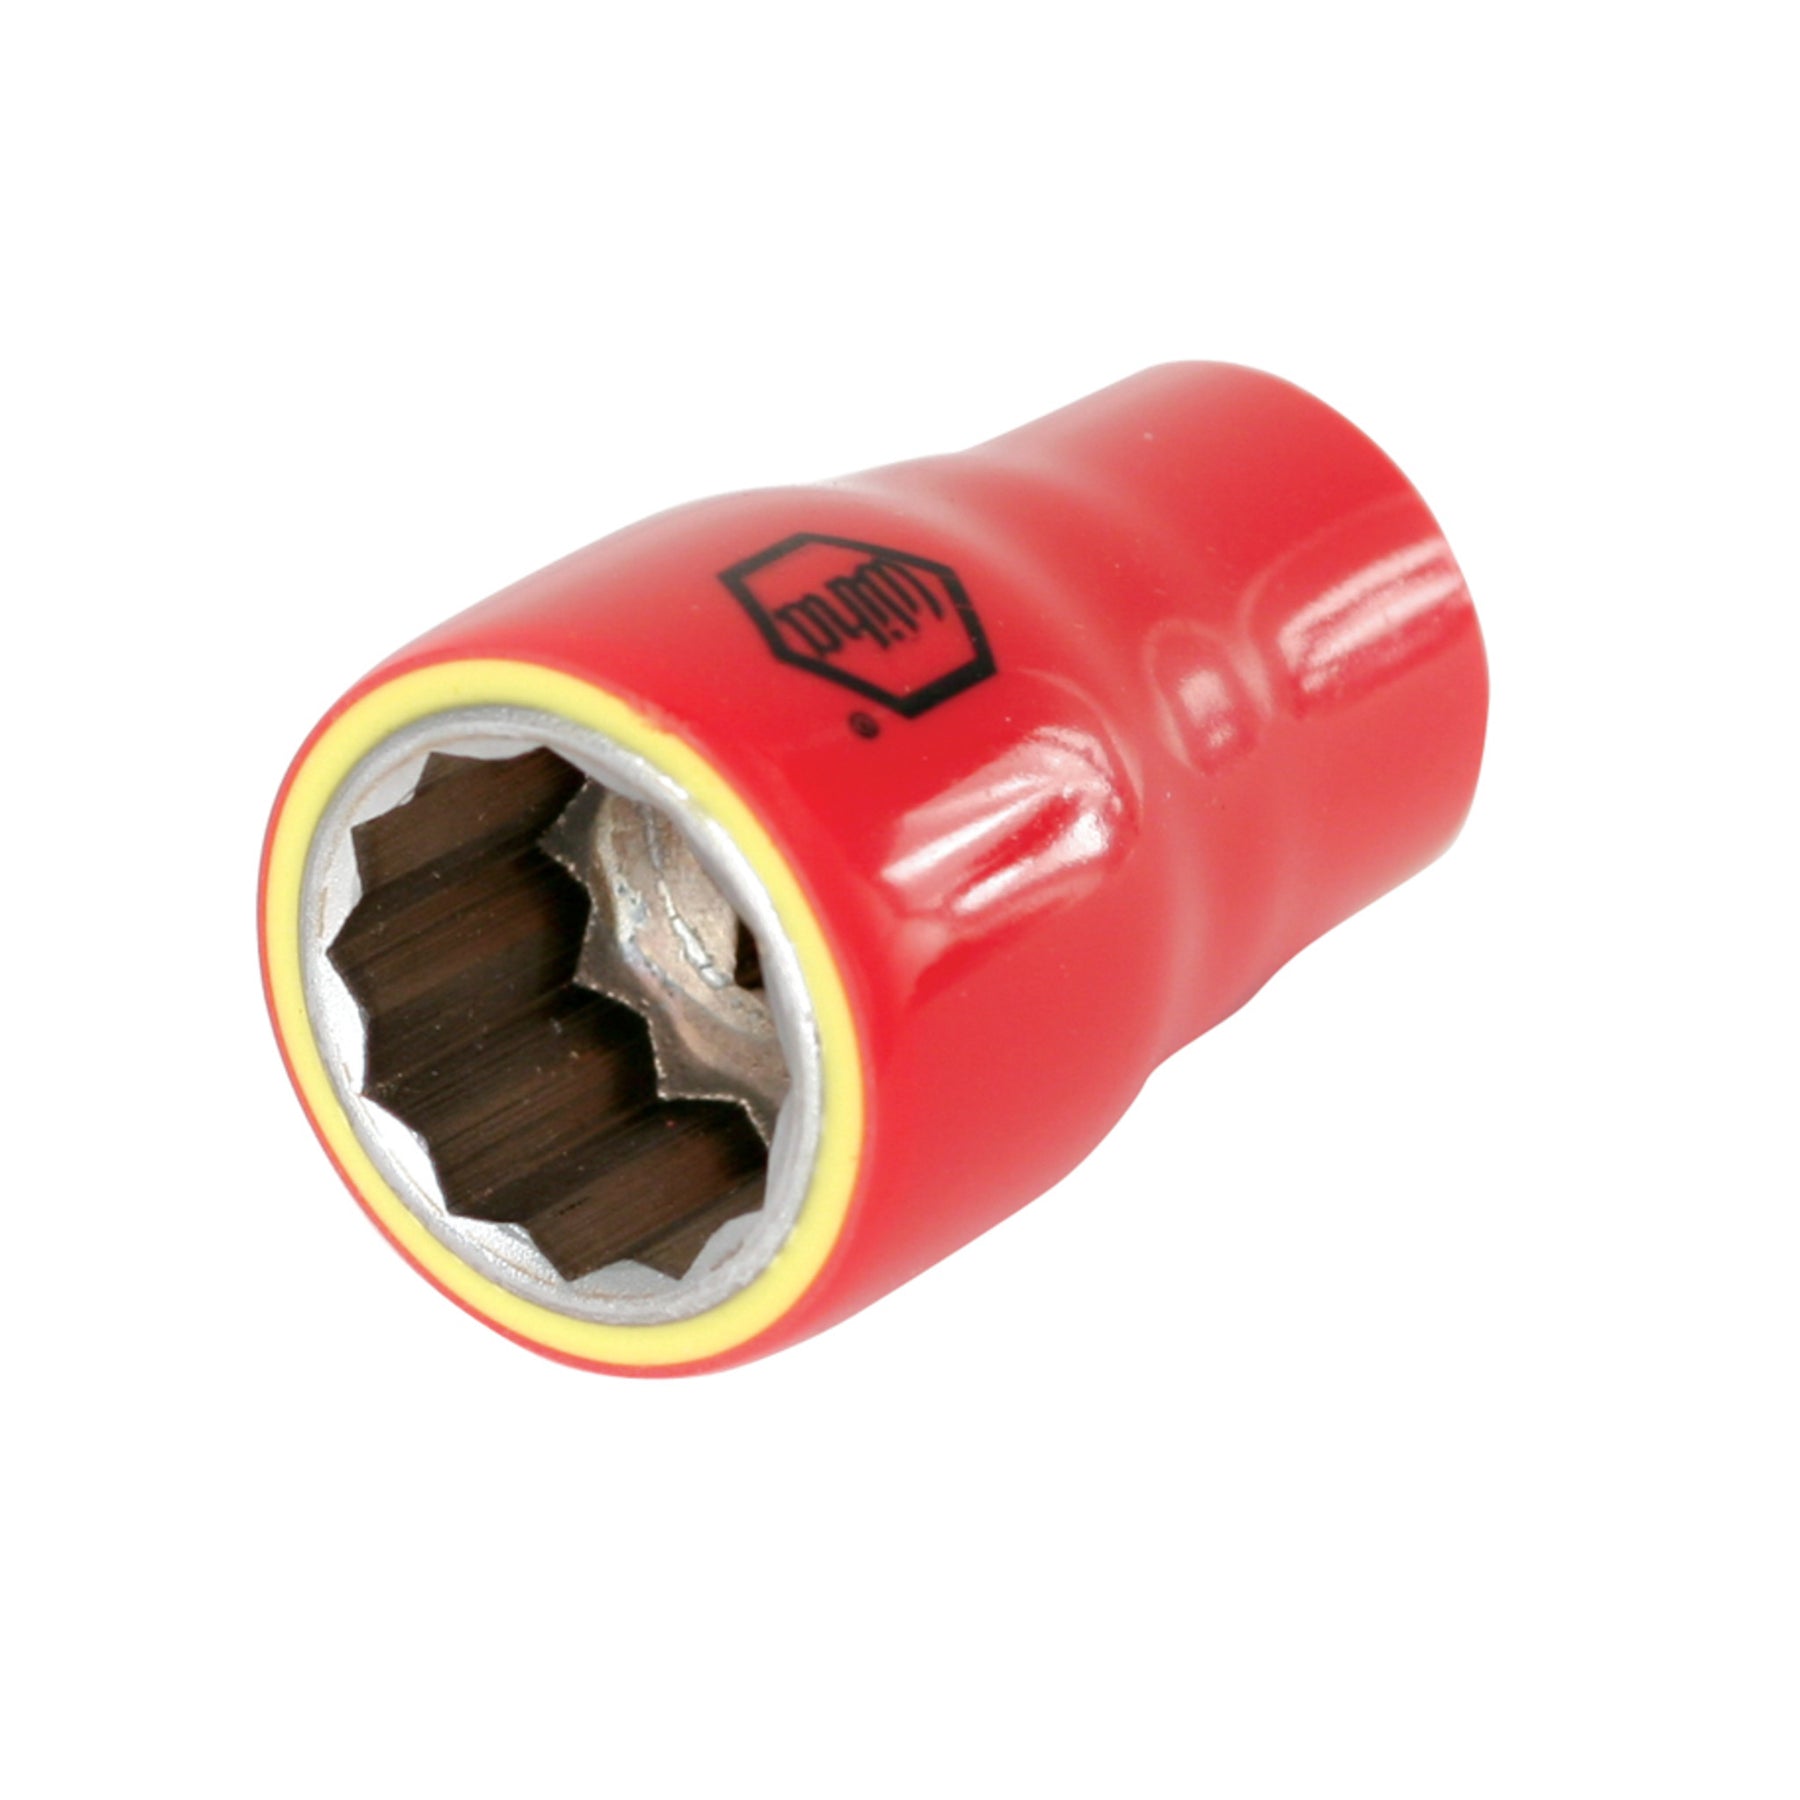 Insulated Socket 1/2" Drive 18mm